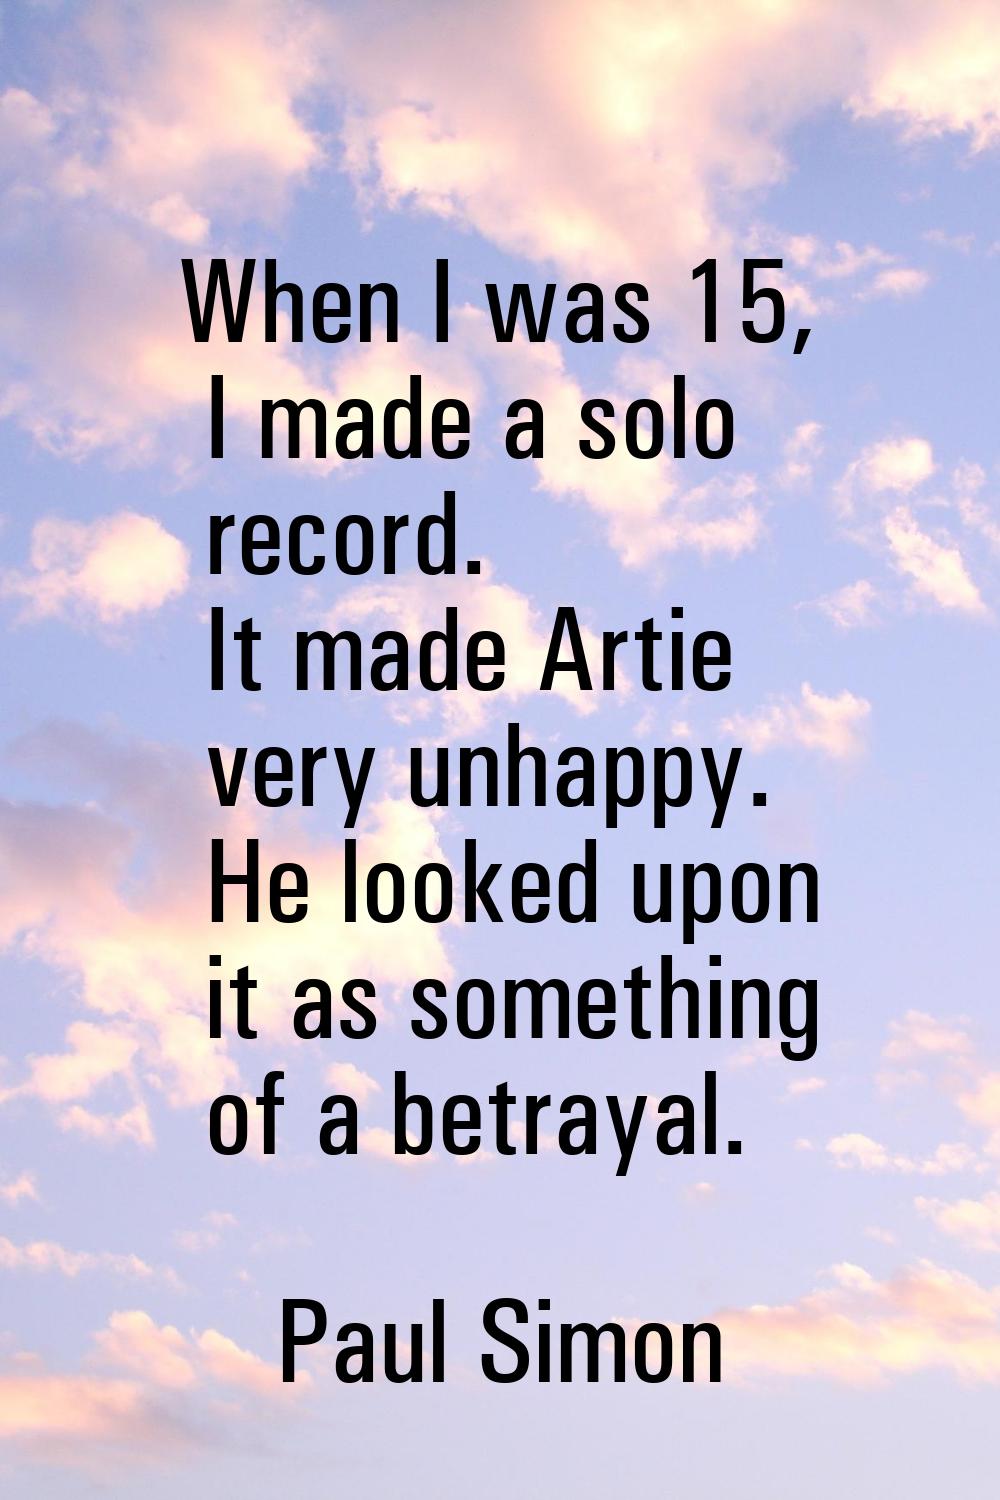 When I was 15, I made a solo record. It made Artie very unhappy. He looked upon it as something of 